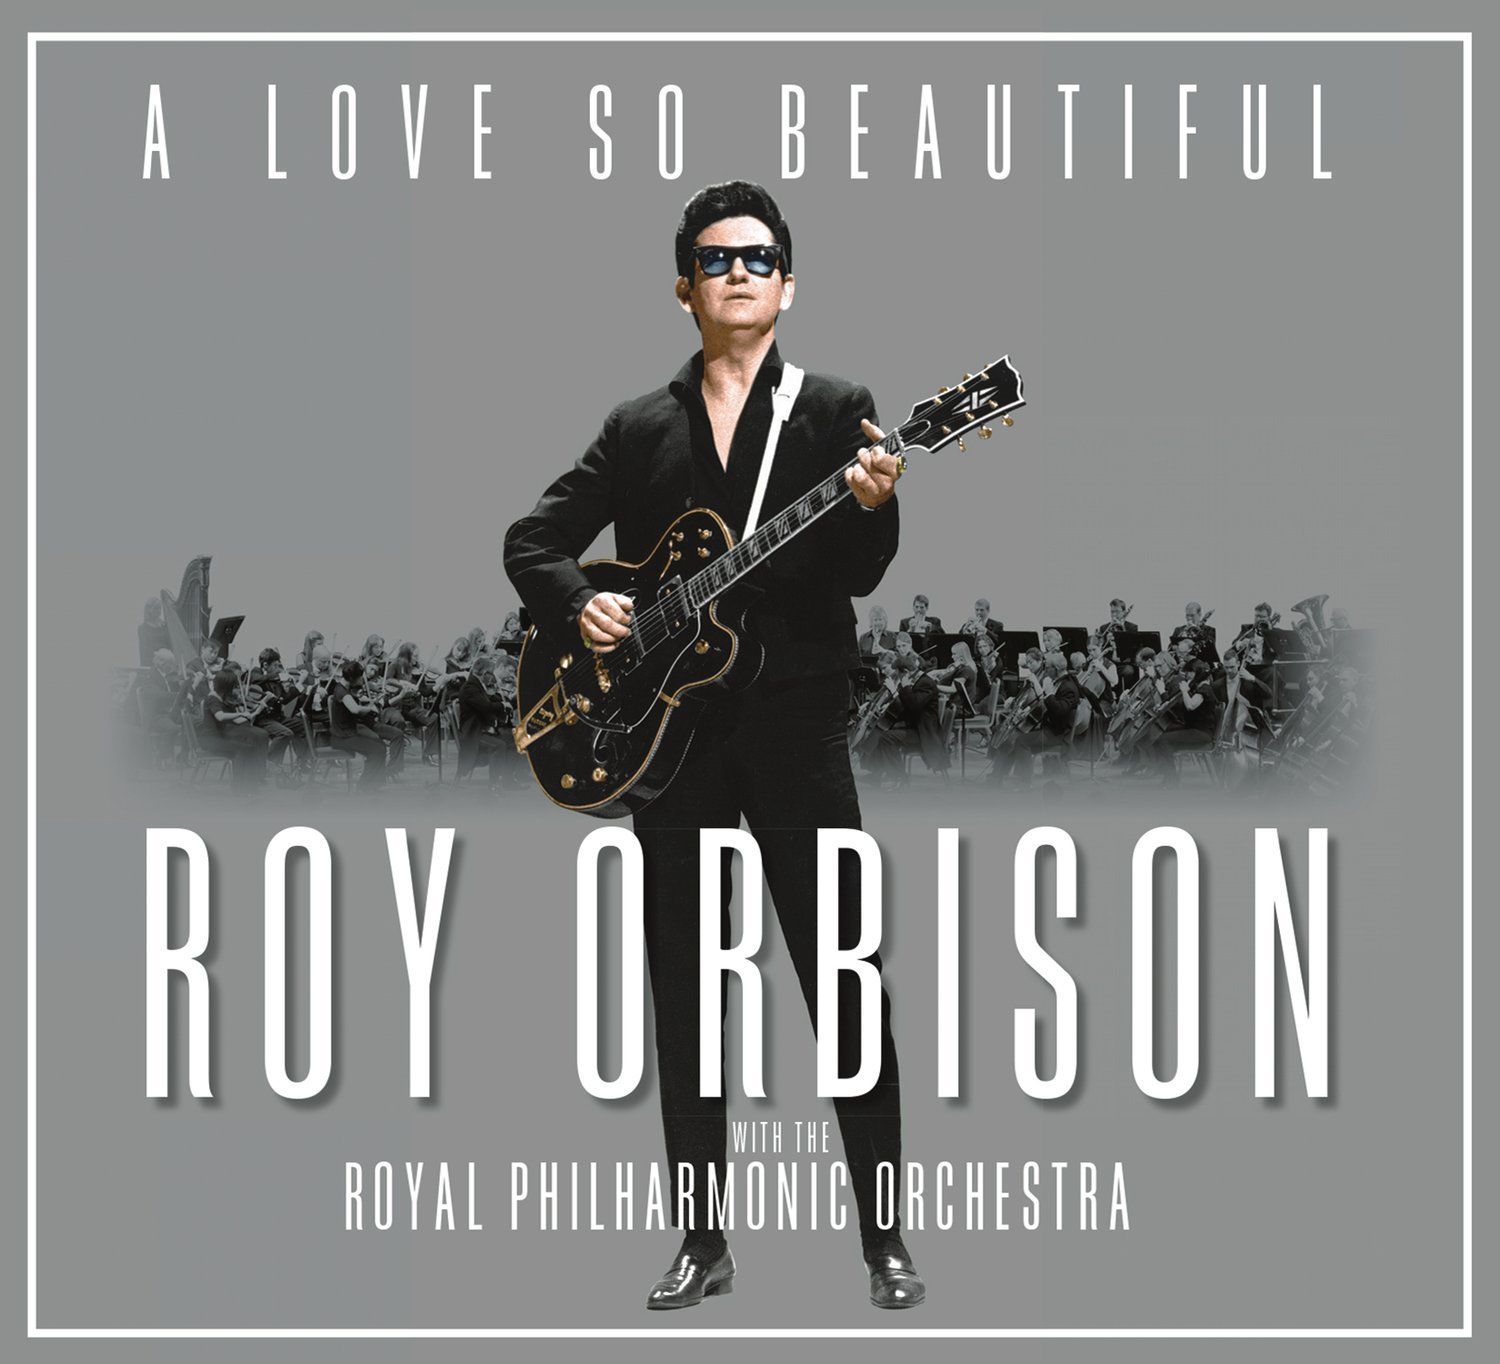 A Love So Beautiful: Roy Orbison & The Royal Philharmonic Orchestra